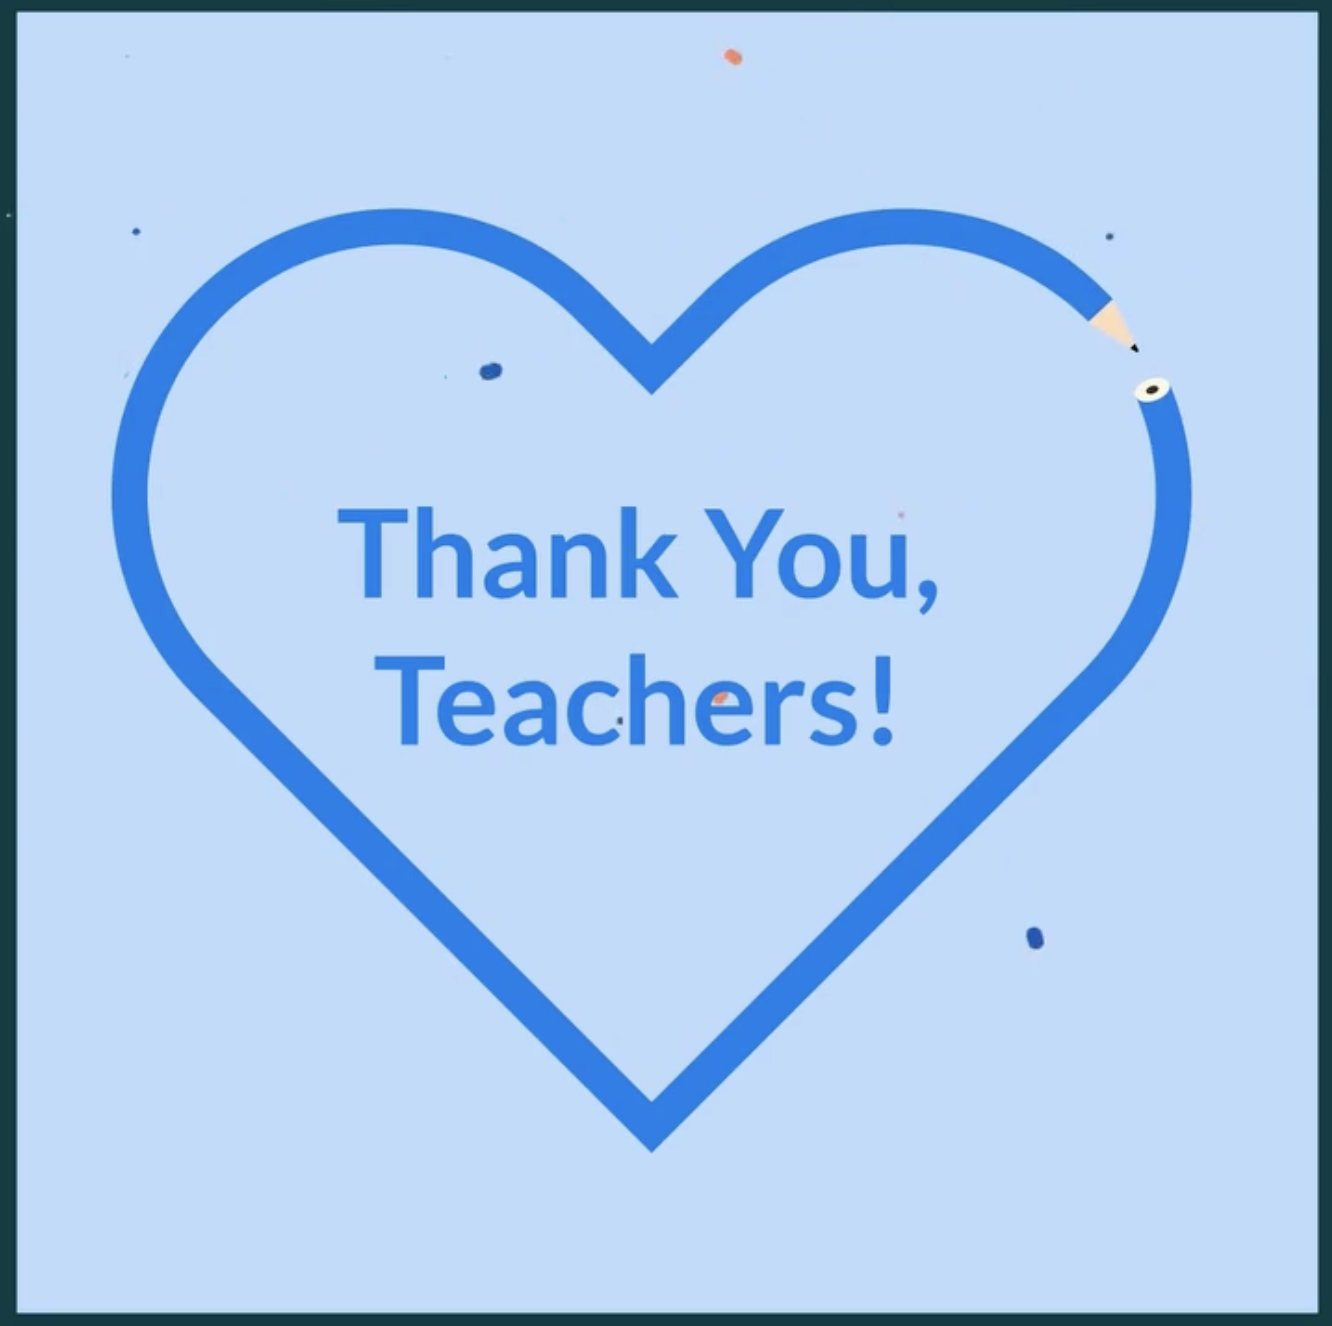 Image of a blue heart with text inside that reads 'Thank You, Teachers!'